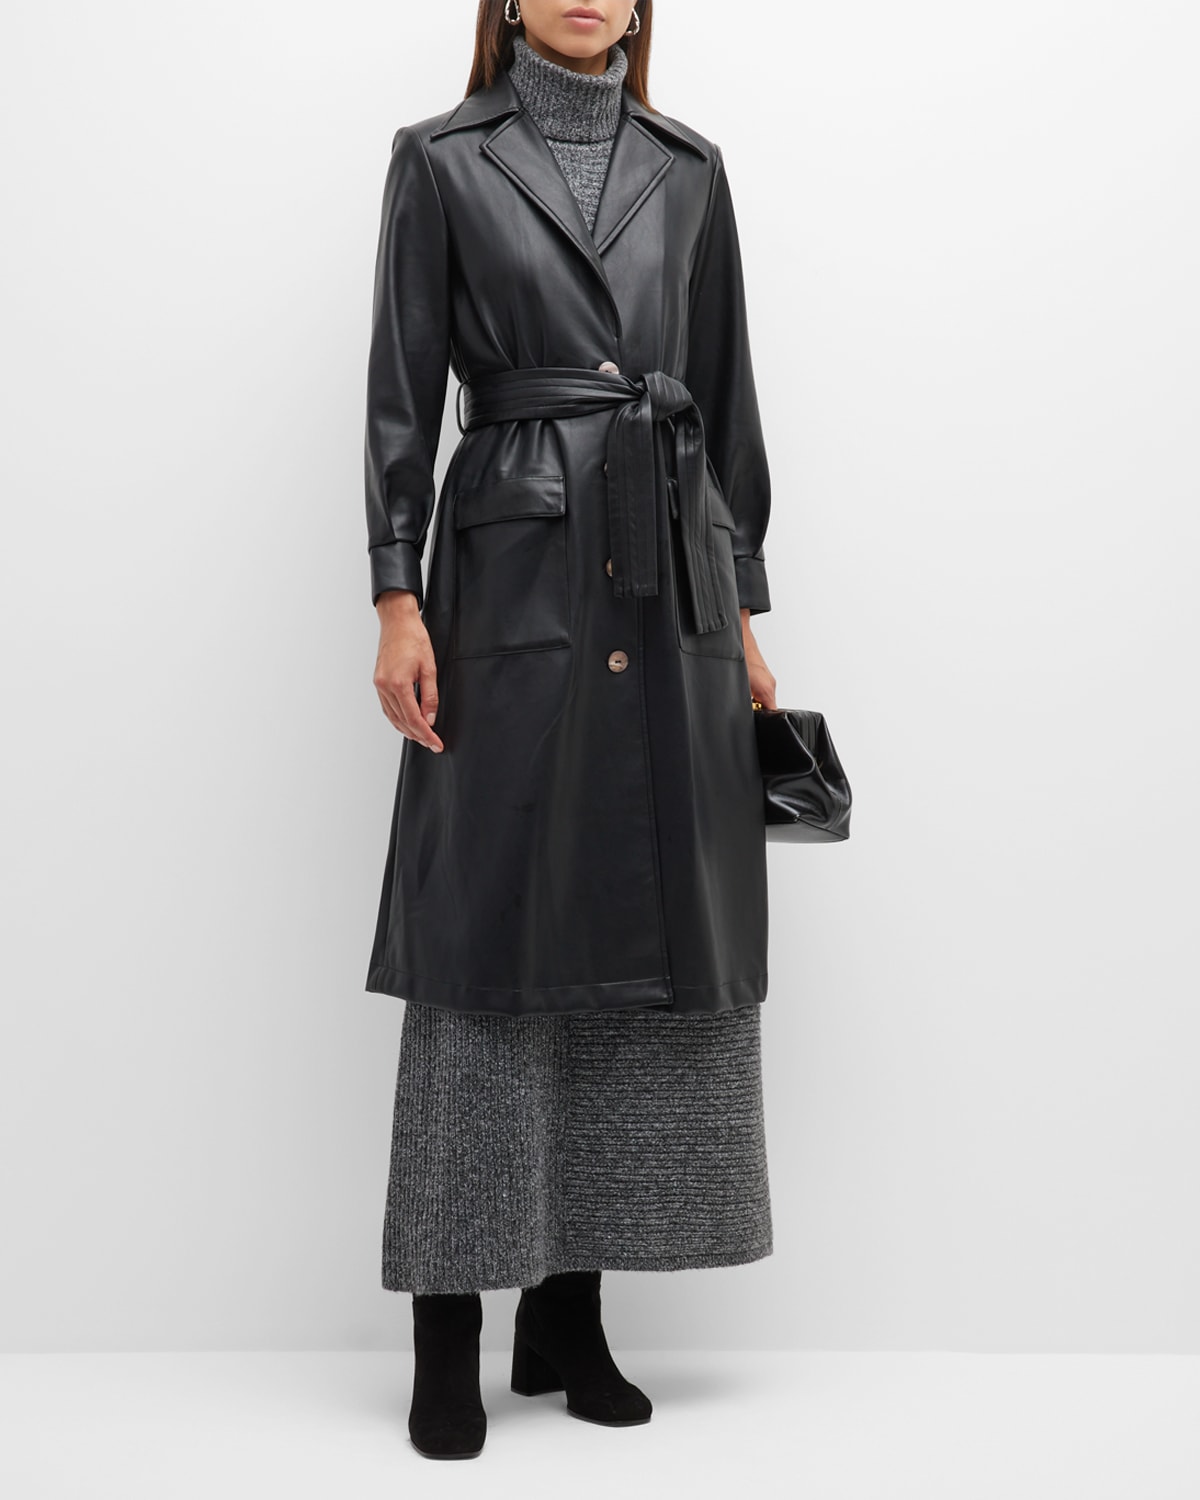 Chloe Ruffle Belted Classic Nappa Leather Trench Coat | Neiman Marcus